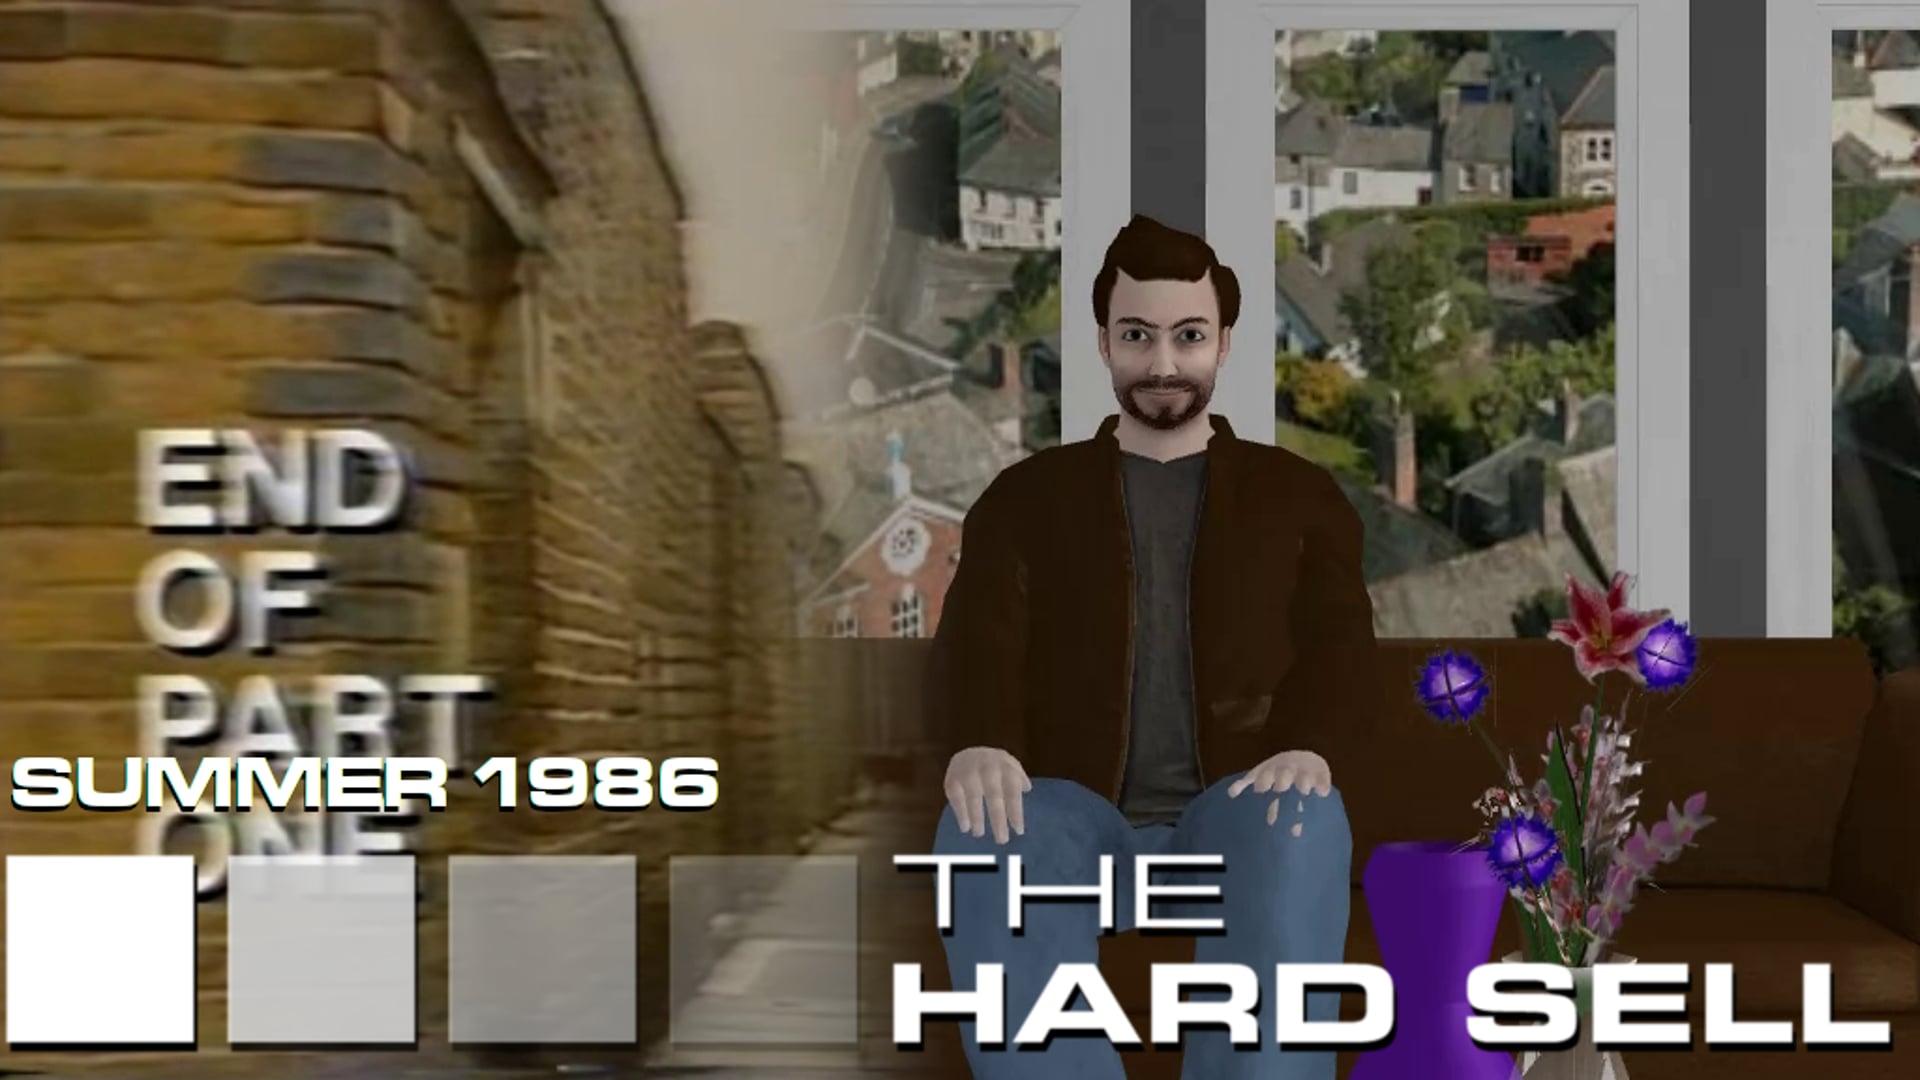 The Hard Sell #167 - Have a Break: Summer 1986